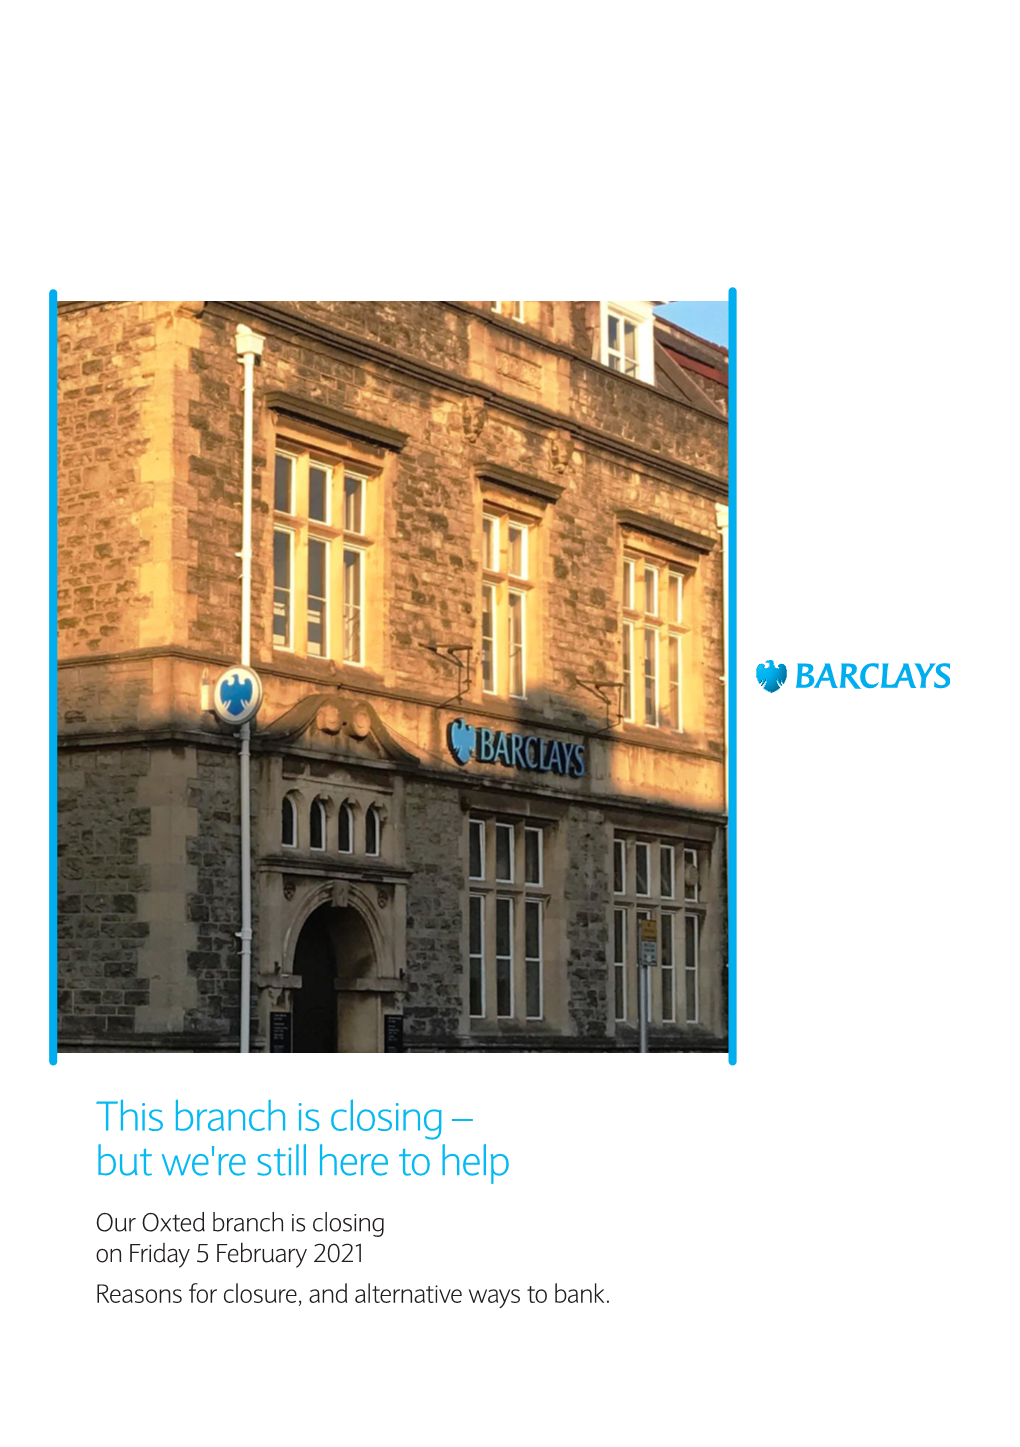 Oxted Branch Is Closing on Friday 5 February 2021 Reasons for Closure, and Alternative Ways to Bank